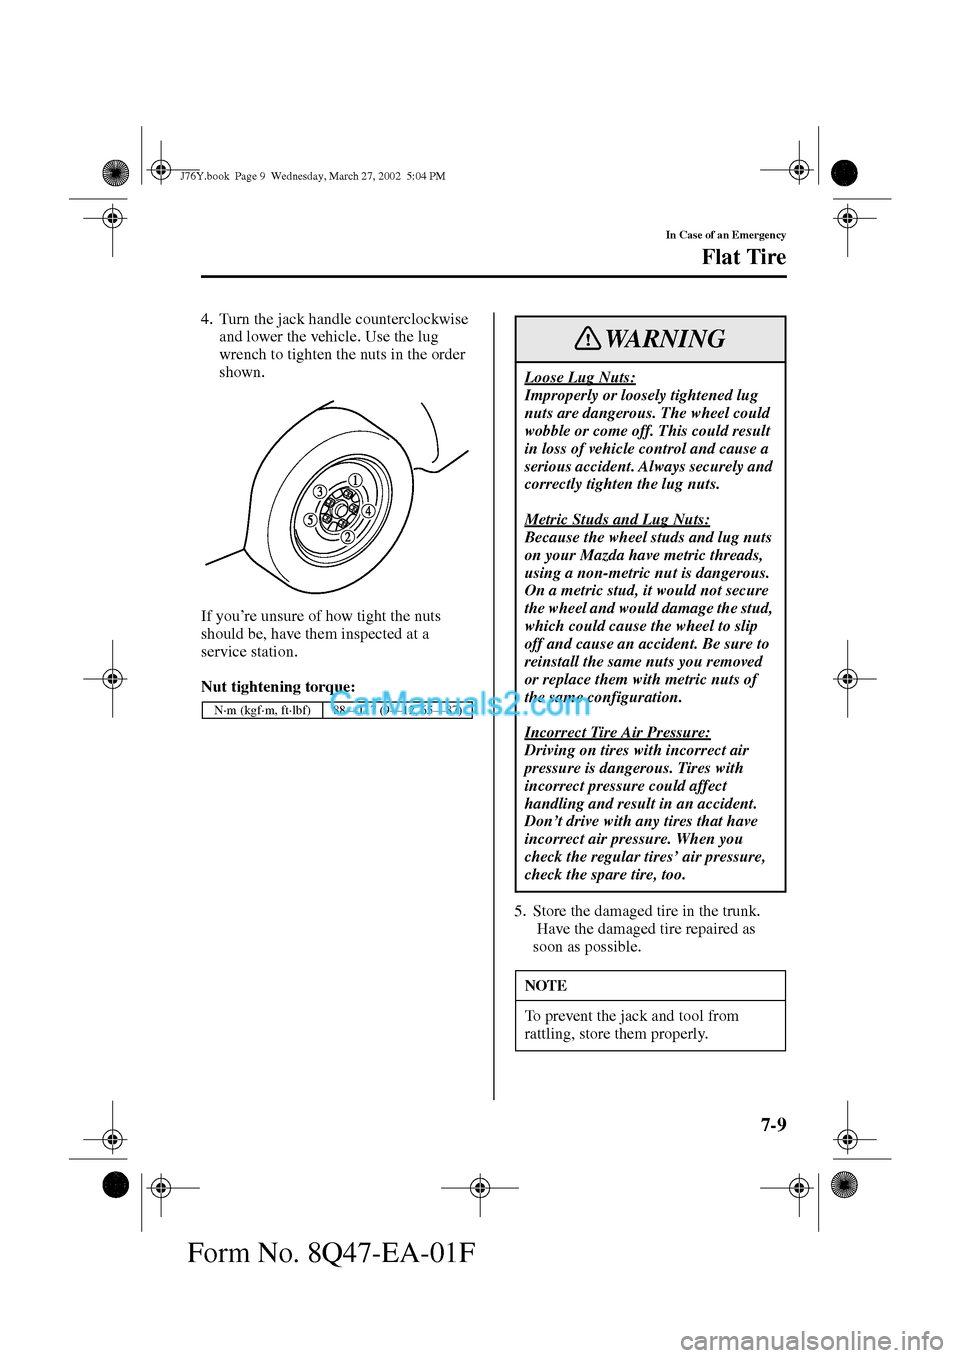 MAZDA MODEL MILLENIA 2002  Owners Manual (in English) 7-9
In Case of an Emergency
Flat Tire
Form No. 8Q47-EA-01F
4. Turn the jack handle counterclockwise 
and lower the vehicle. Use the lug 
wrench to tighten the nuts in the order 
shown.
If you’re uns